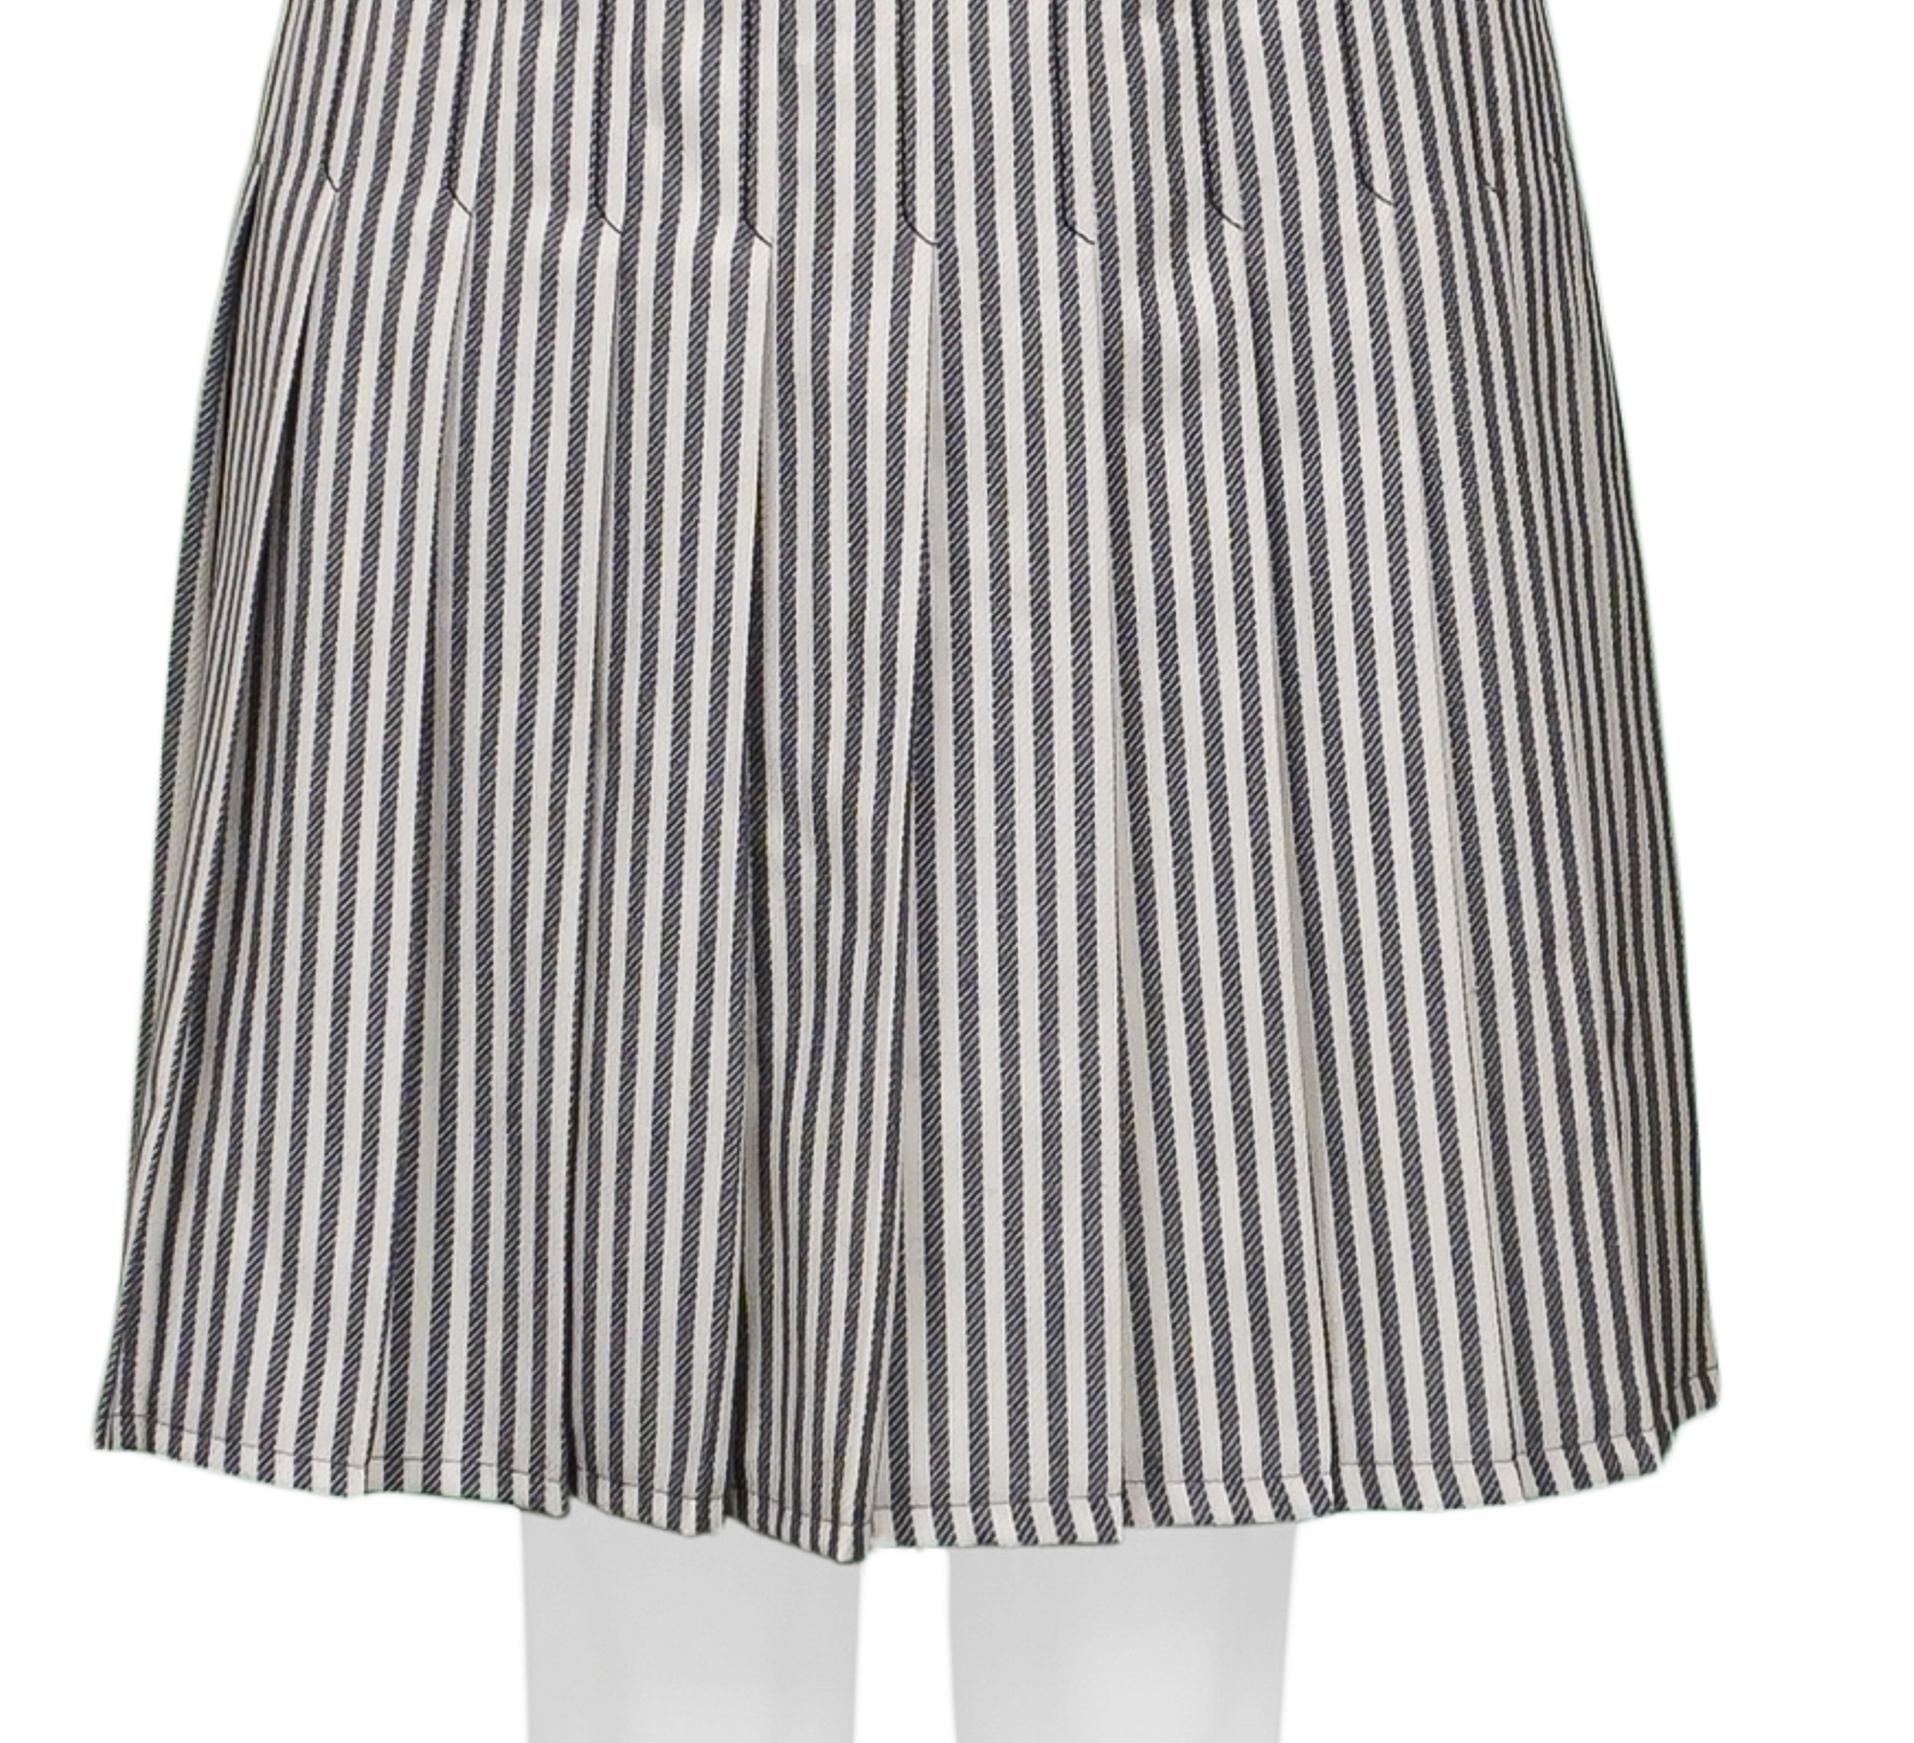 Celine Black & White Stripe Box Pleat Skirt With Hardware In Excellent Condition For Sale In Los Angeles, CA